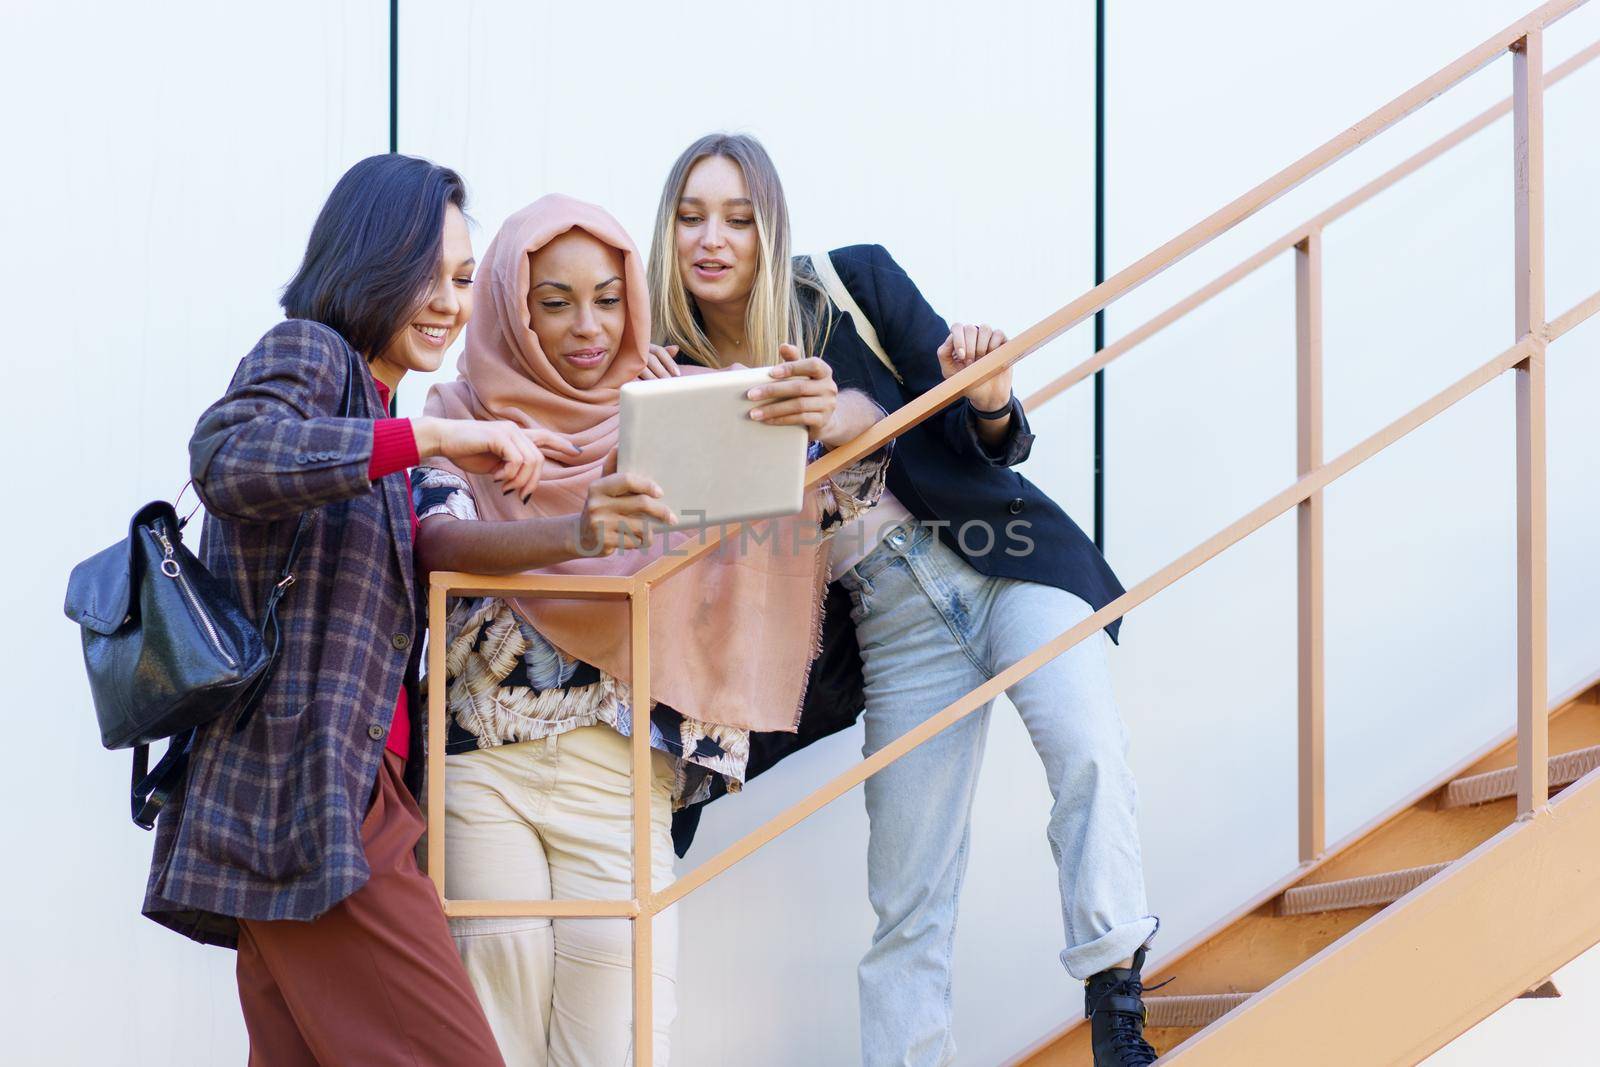 Confident young multiracial women smiling and sharing tablet standing on metal staircase on street